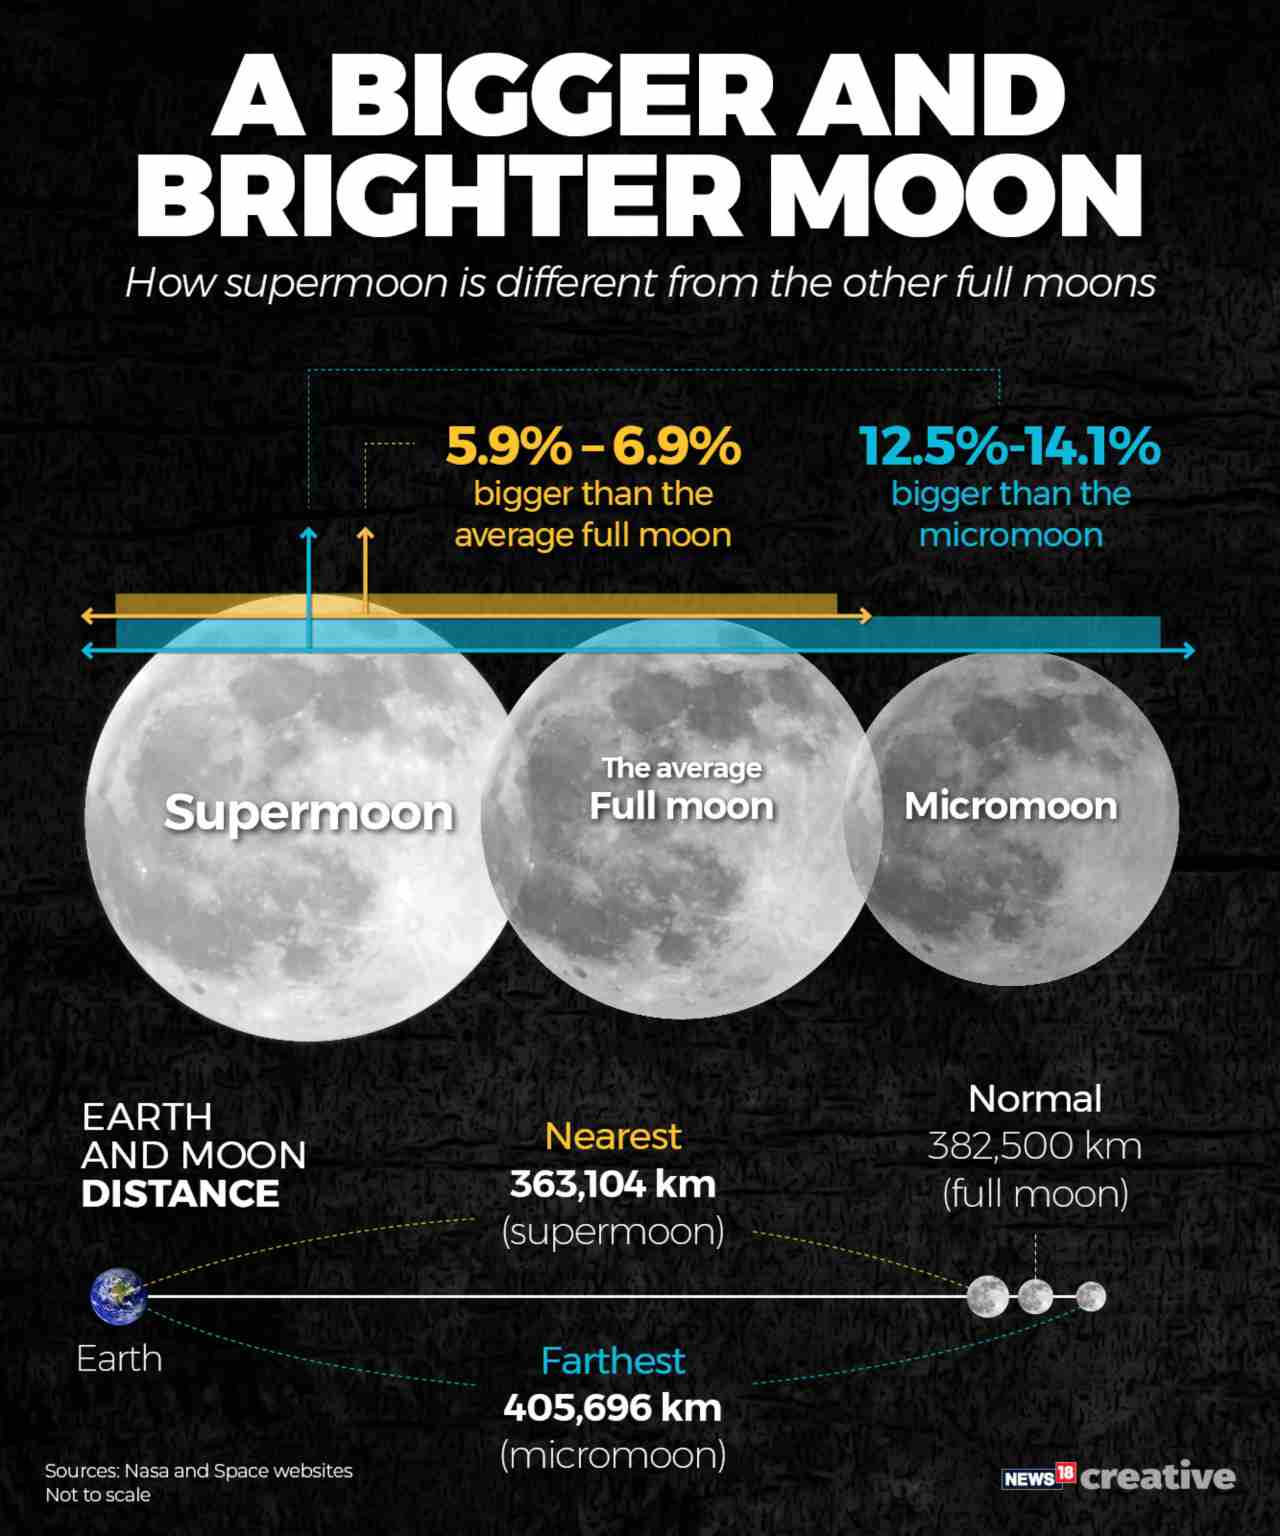 How the supermoon, full moon and micromoon differ in size.